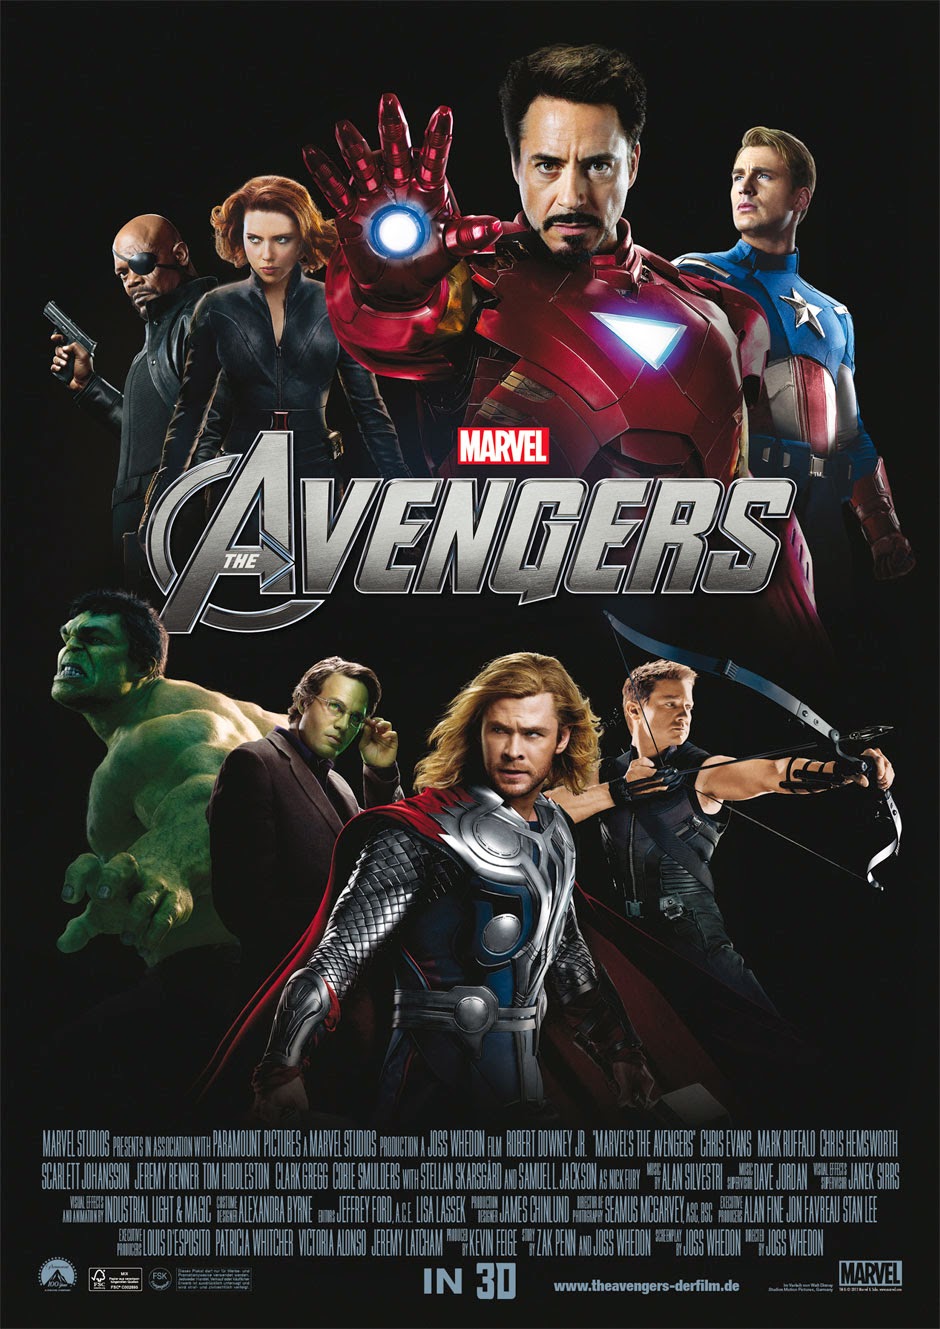 Download FIlm The Avengers Full Movie (2012) HD Subtitle 